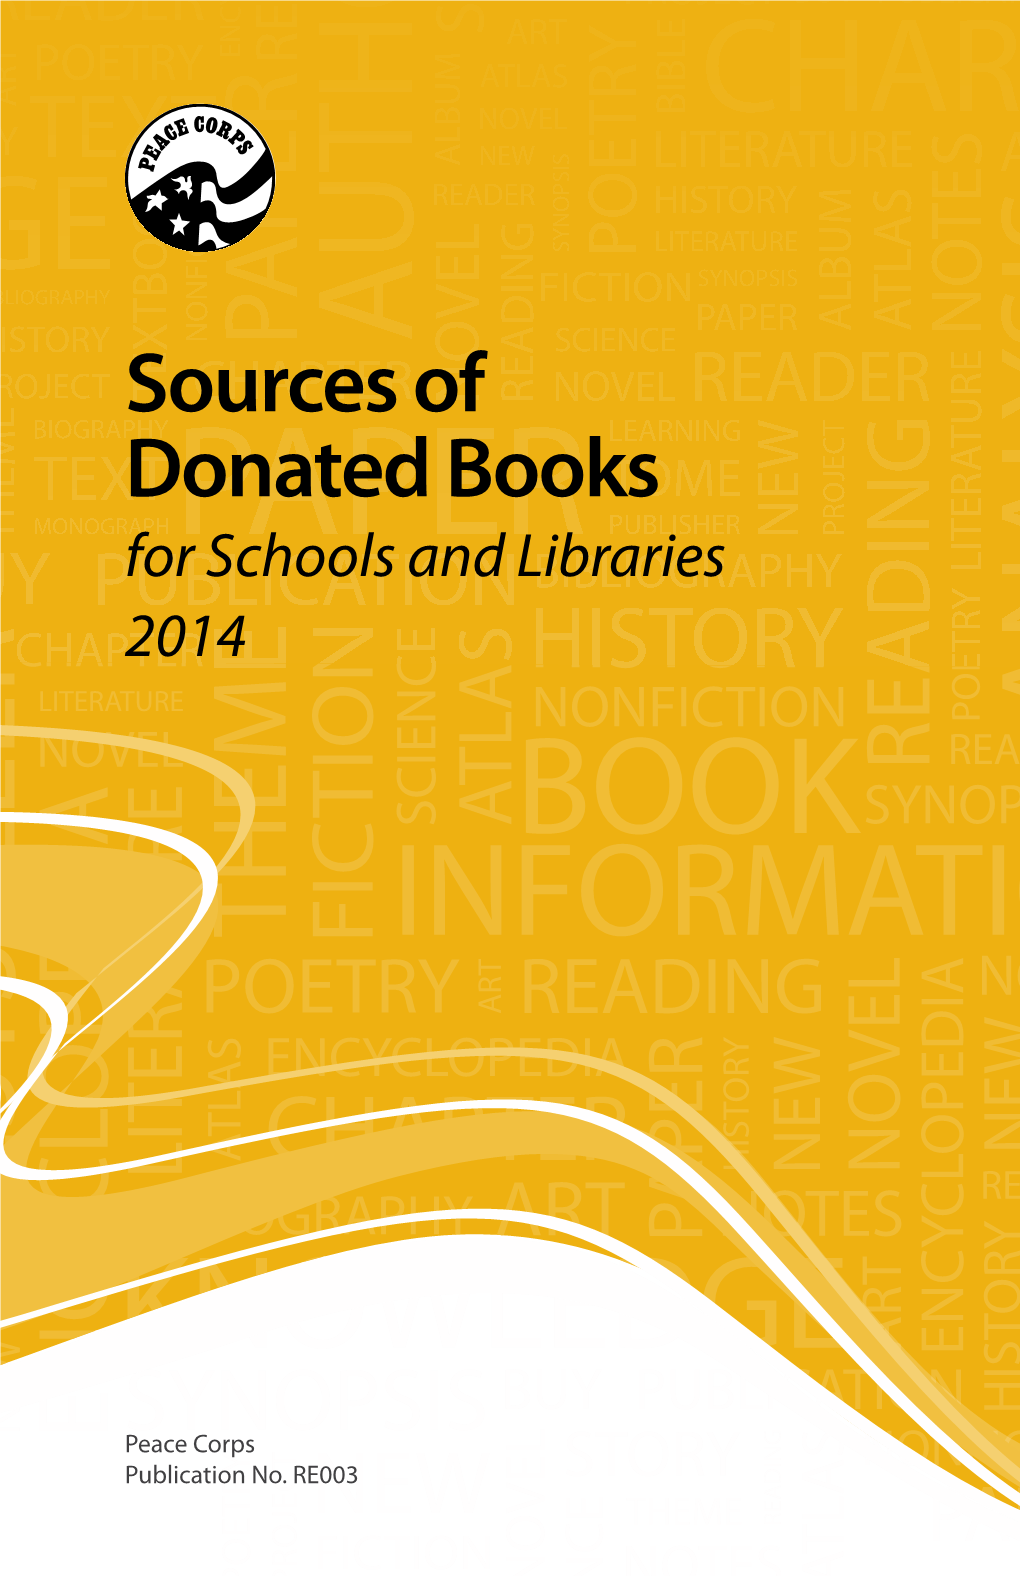 Sources of Donated Books for Schools and Libraries 2014